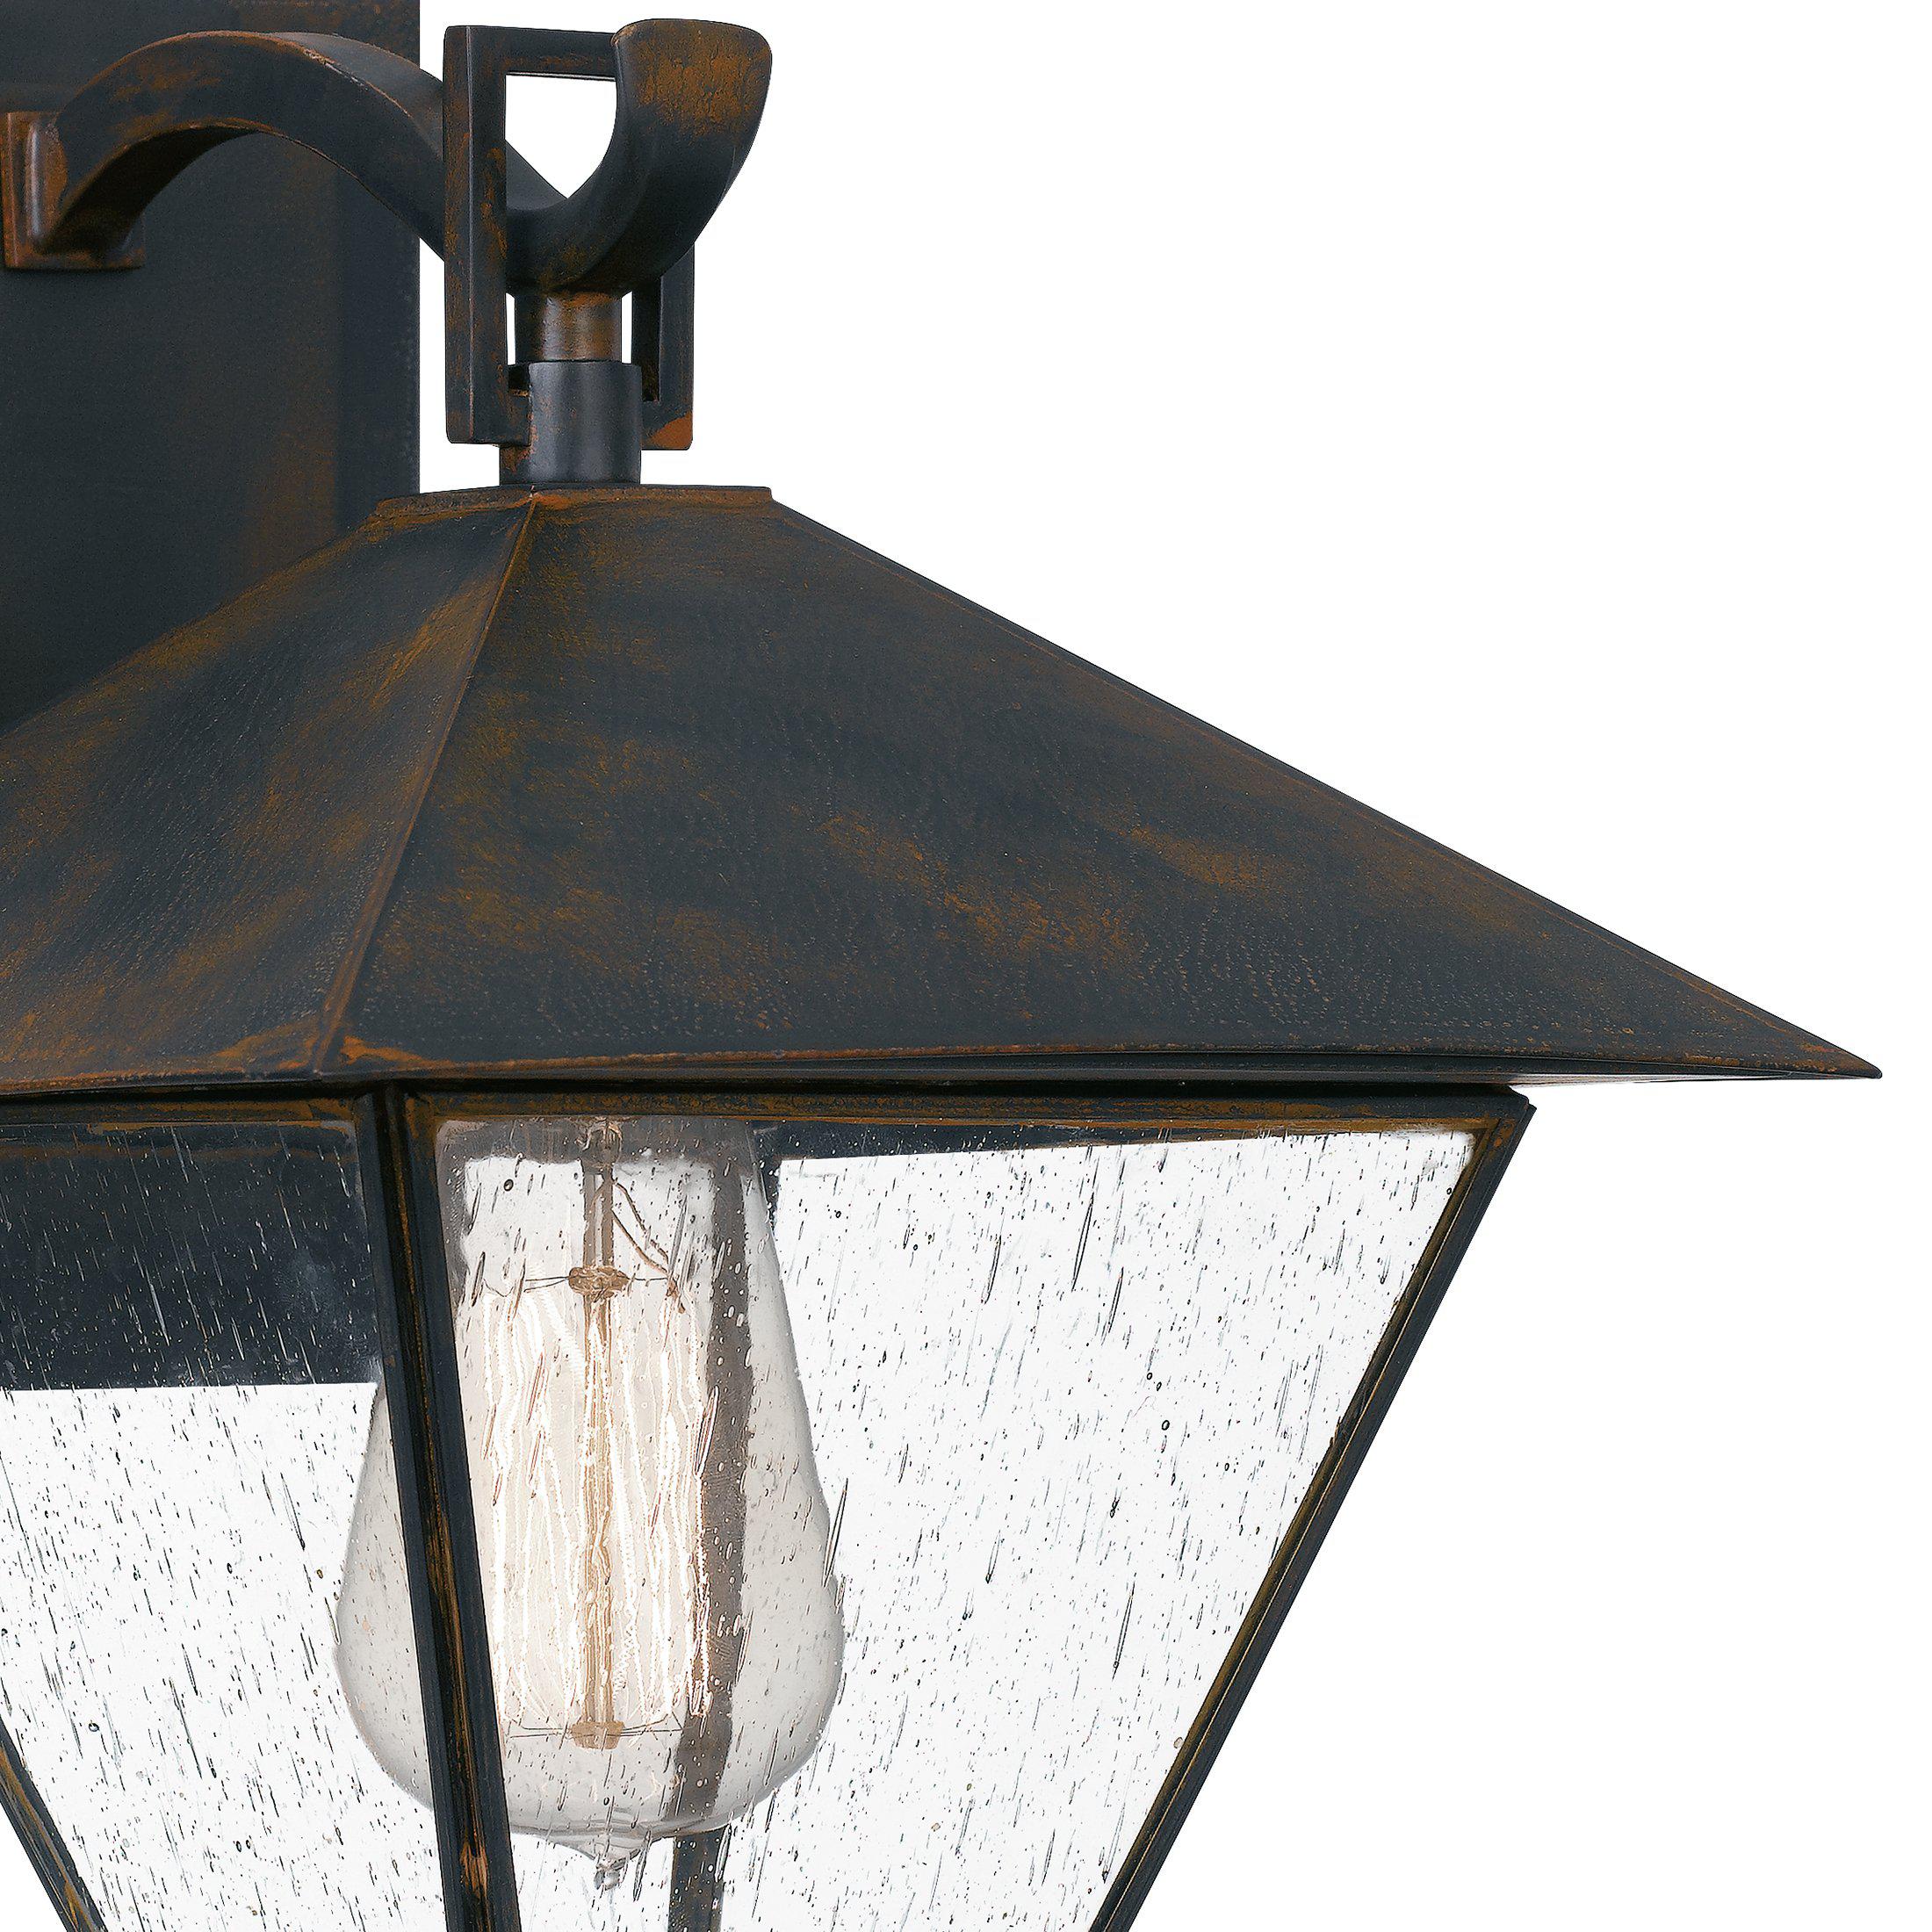 Quoizel  Corporal Outdoor Lantern, Small Outdoor Light Fixture Quoizel   